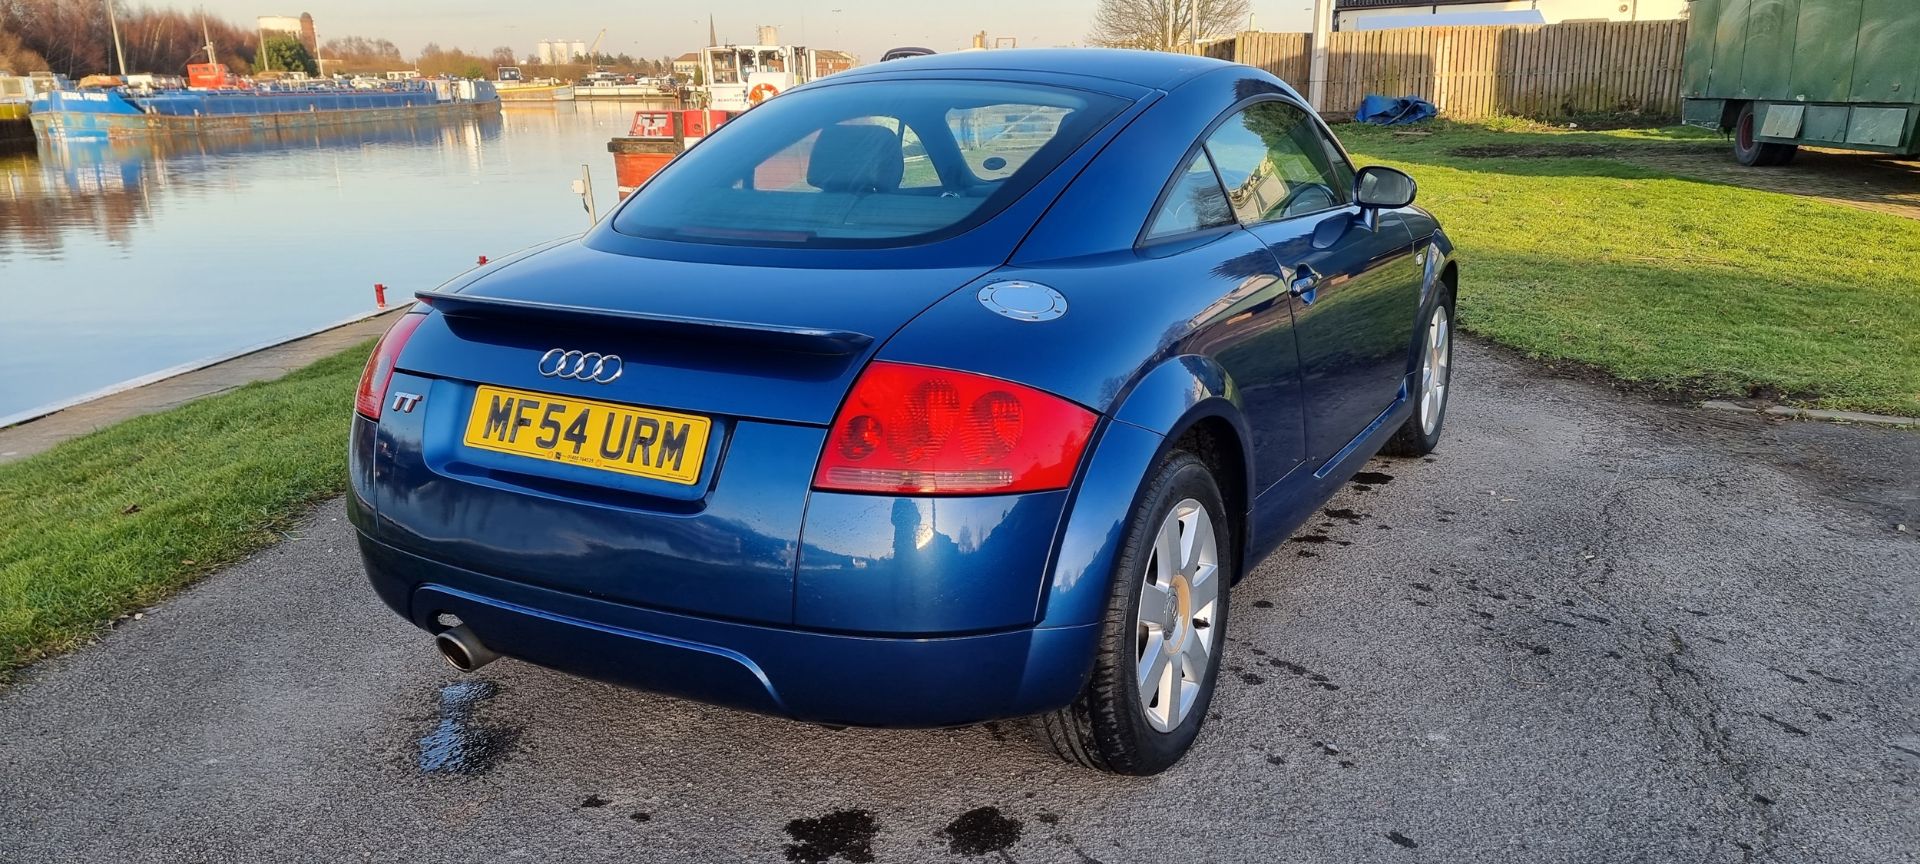 2004 Audi TT Coupe, 180hp, 1781cc. Registration number MF54 URM. Engine number TRUZZZ8N651005485. - Image 5 of 18